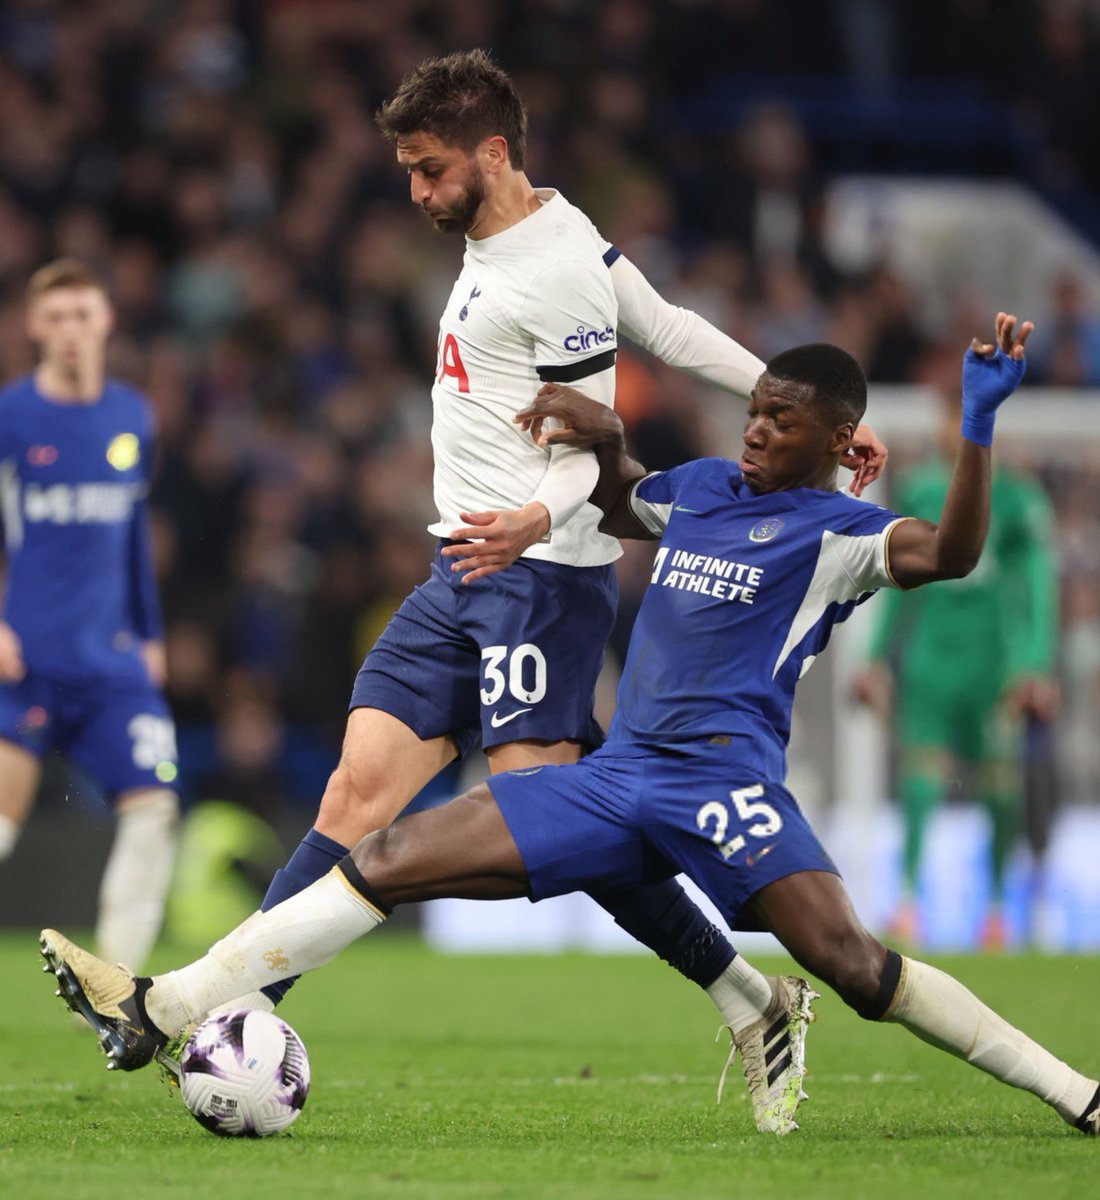 🇪🇨 Moises Caicedo has now registered the most successful blocks (21) than any other Chelsea player in the Premier League this season. 

This mans heart. 

#CFC #CHETOT #CHELSEA